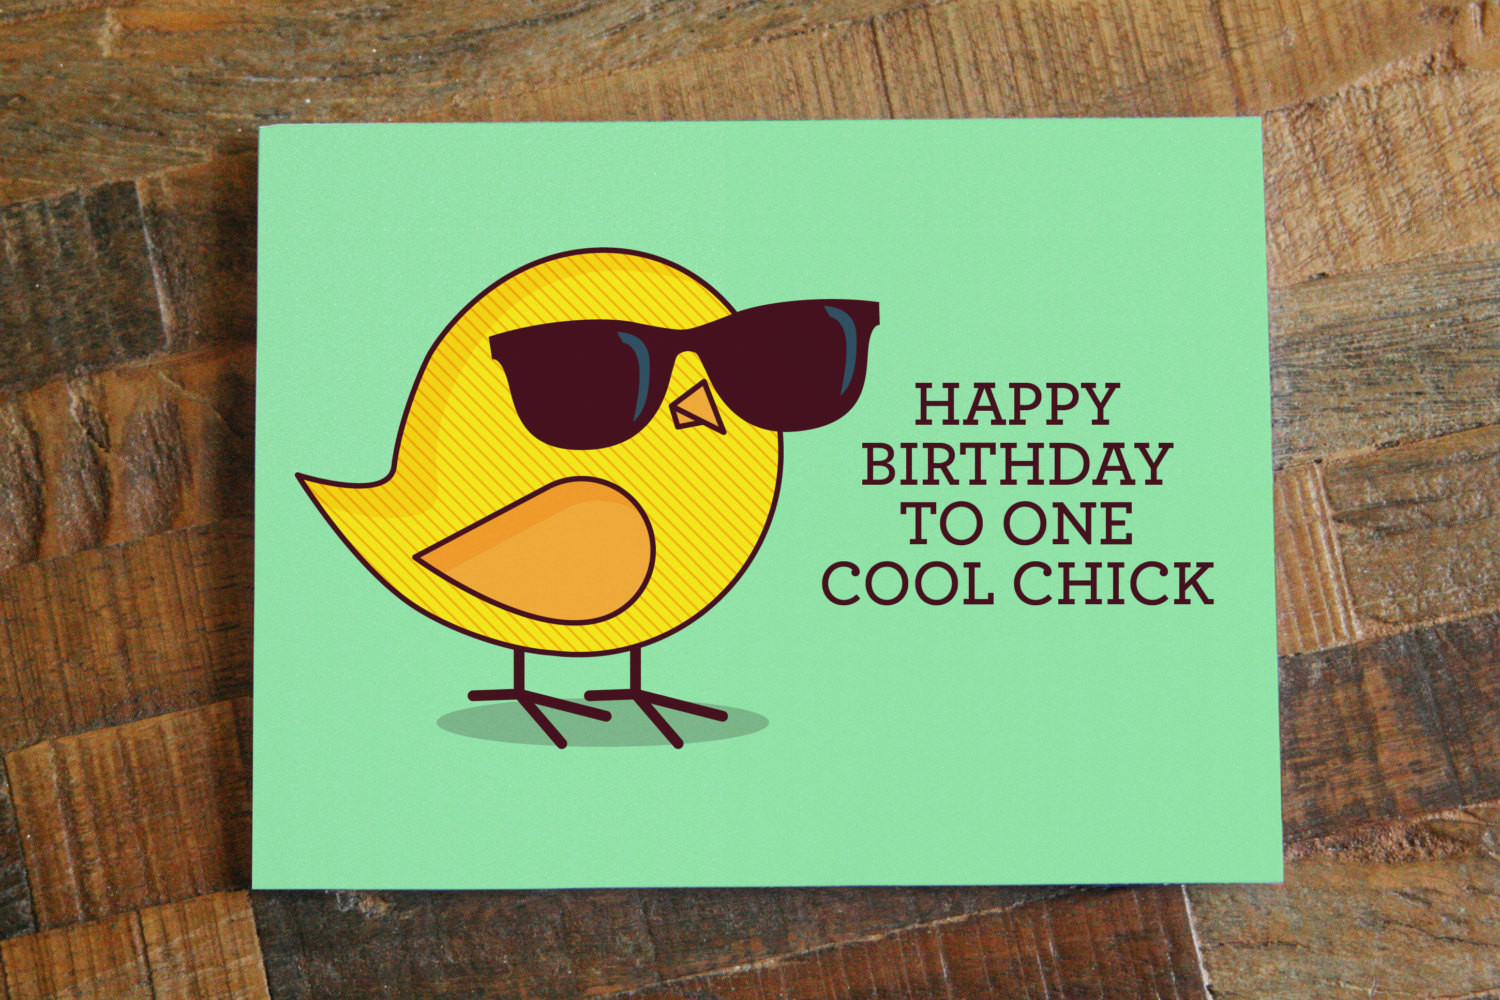 Funny Happy Birthday Cards
 Funny Birthday Card For Her Happy Birthday to e Cool